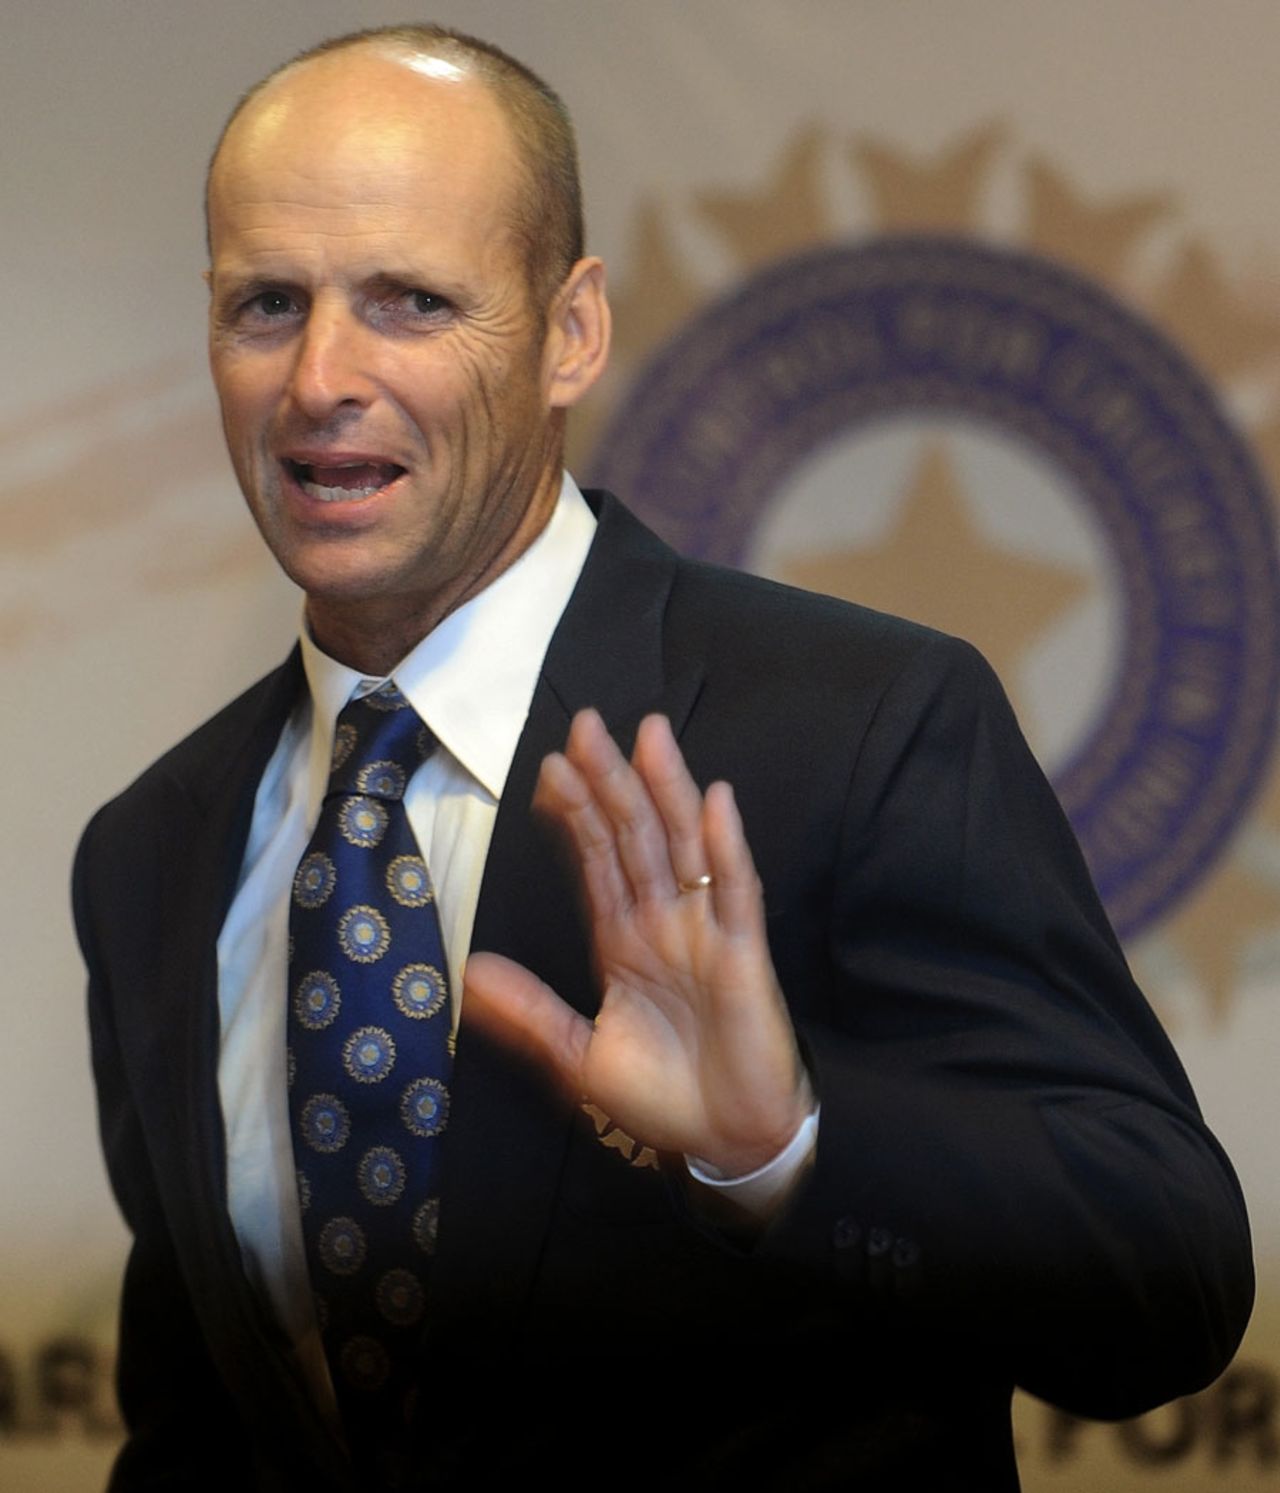 Gary Kirsten addresses a press conference in Mumbai, April 5, 2011